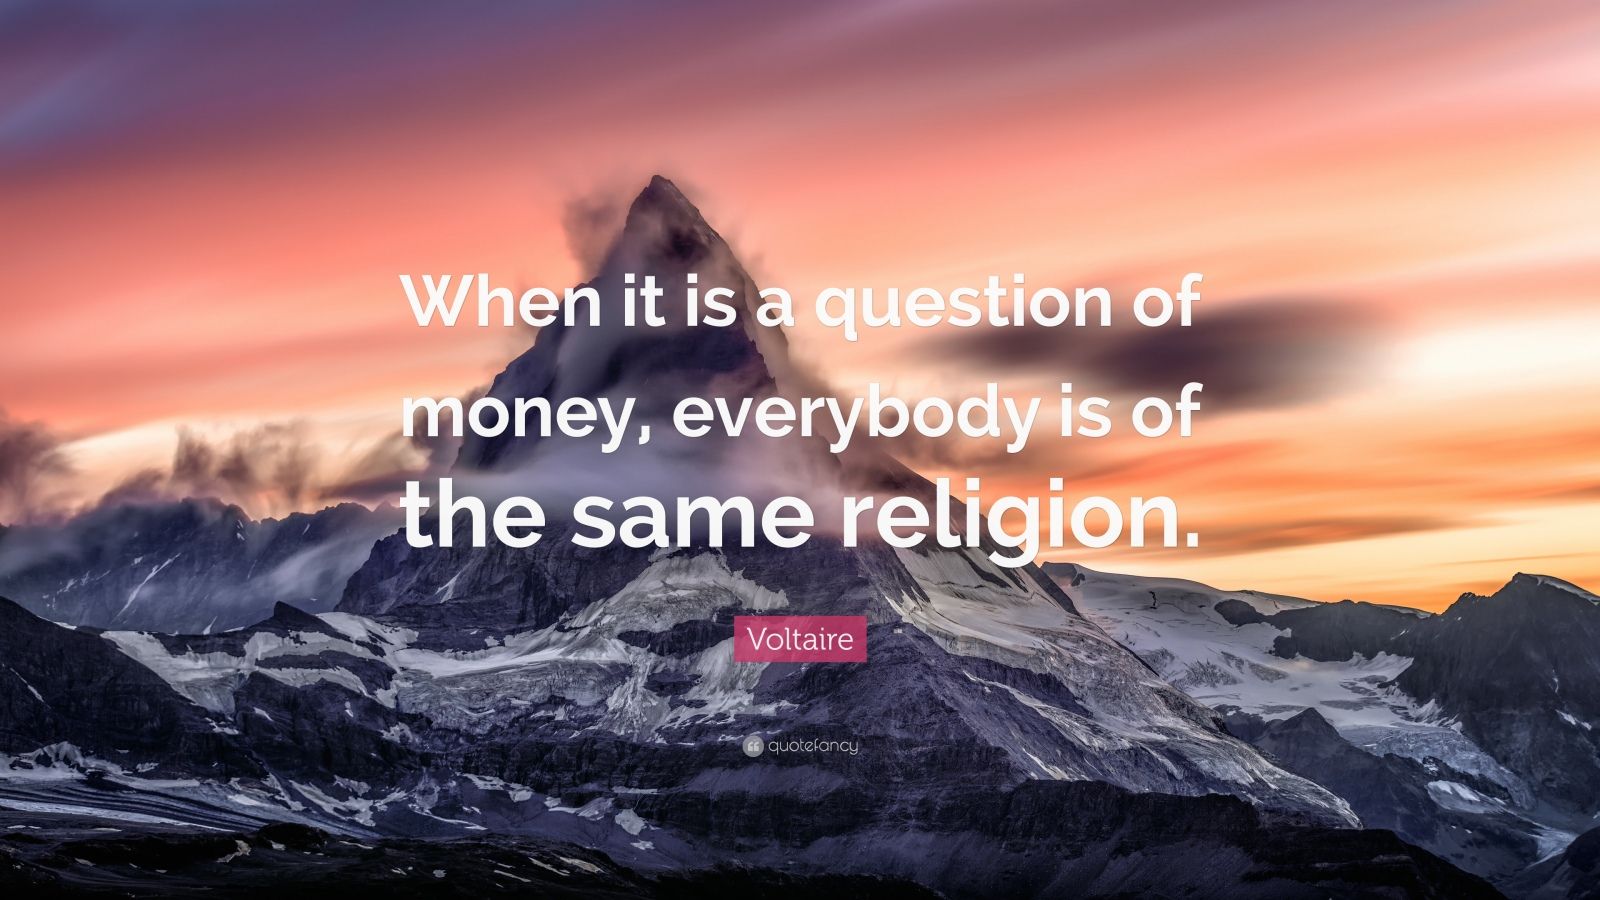 Voltaire Quote: “When it is a question of money, everybody is of the same religion ...